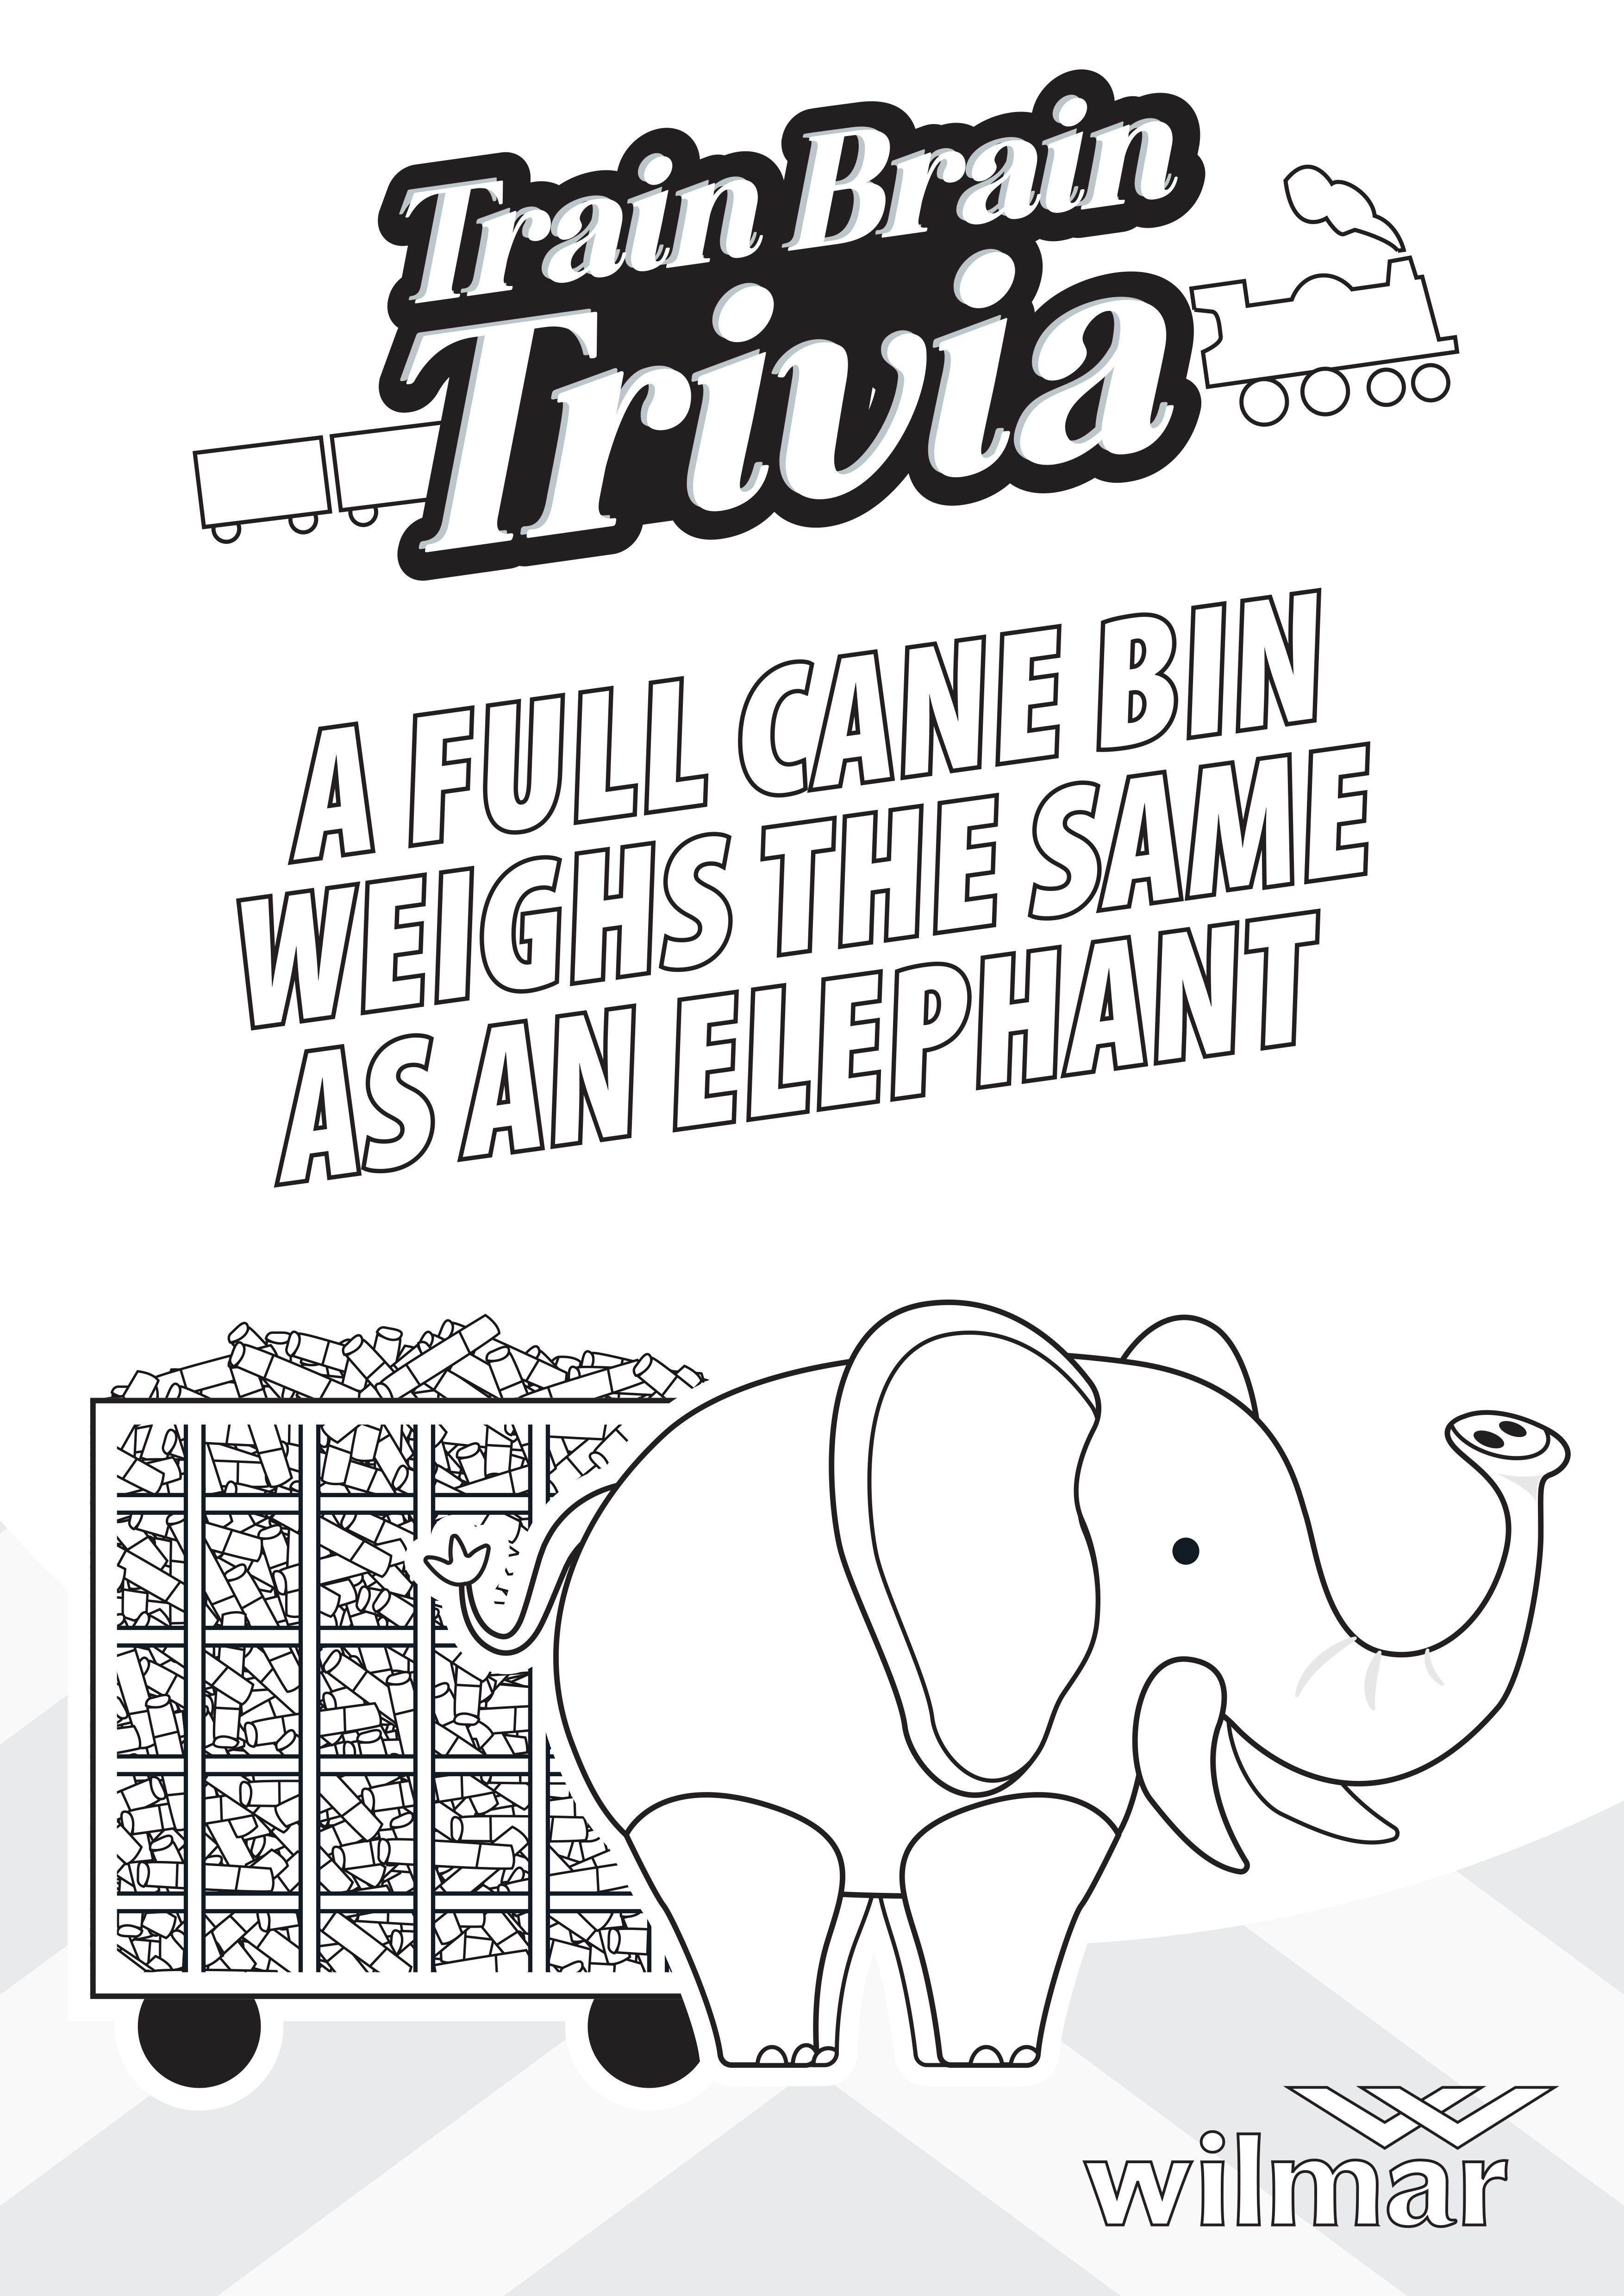 Cane bin = elephant colouring in